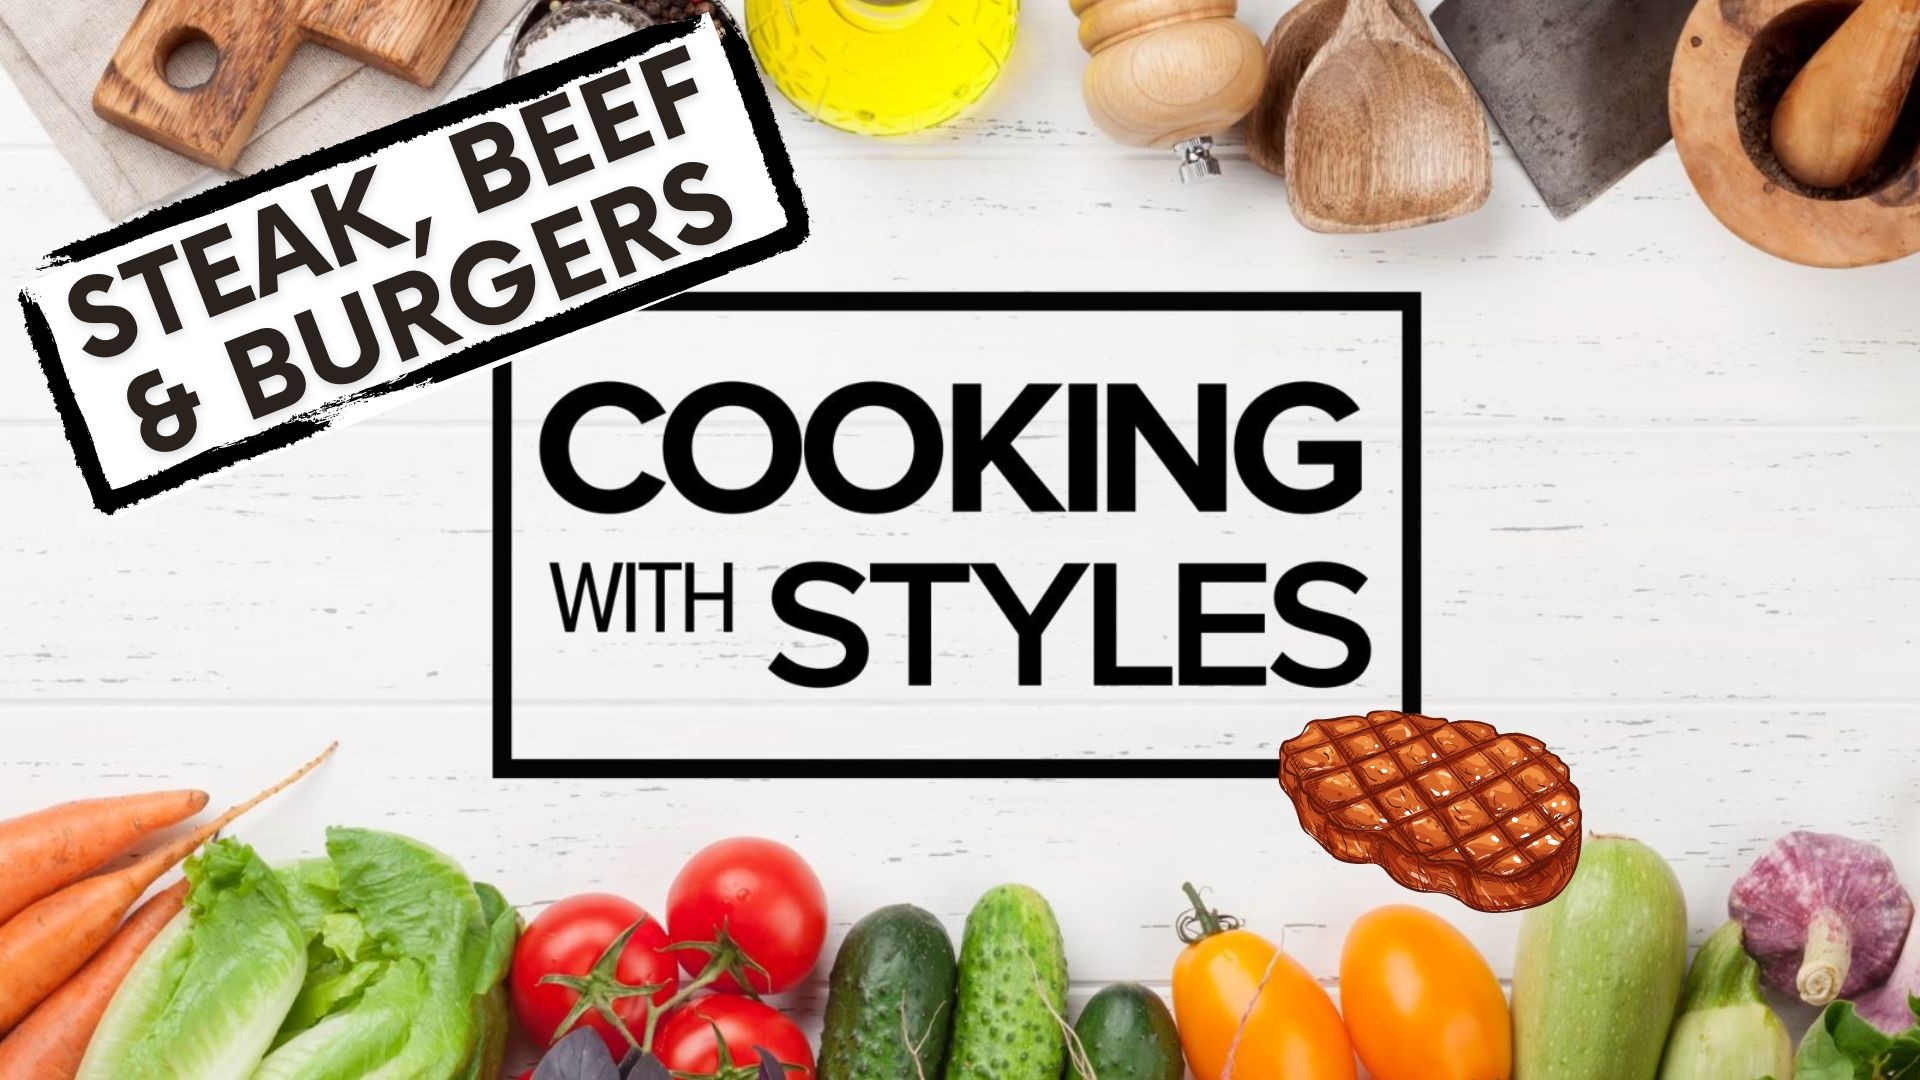 KFMB's Shawn Styles has recipes for the carnivores out there looking to make some great steak, burgers or beef dishes. He also has tips on what meat to buy.